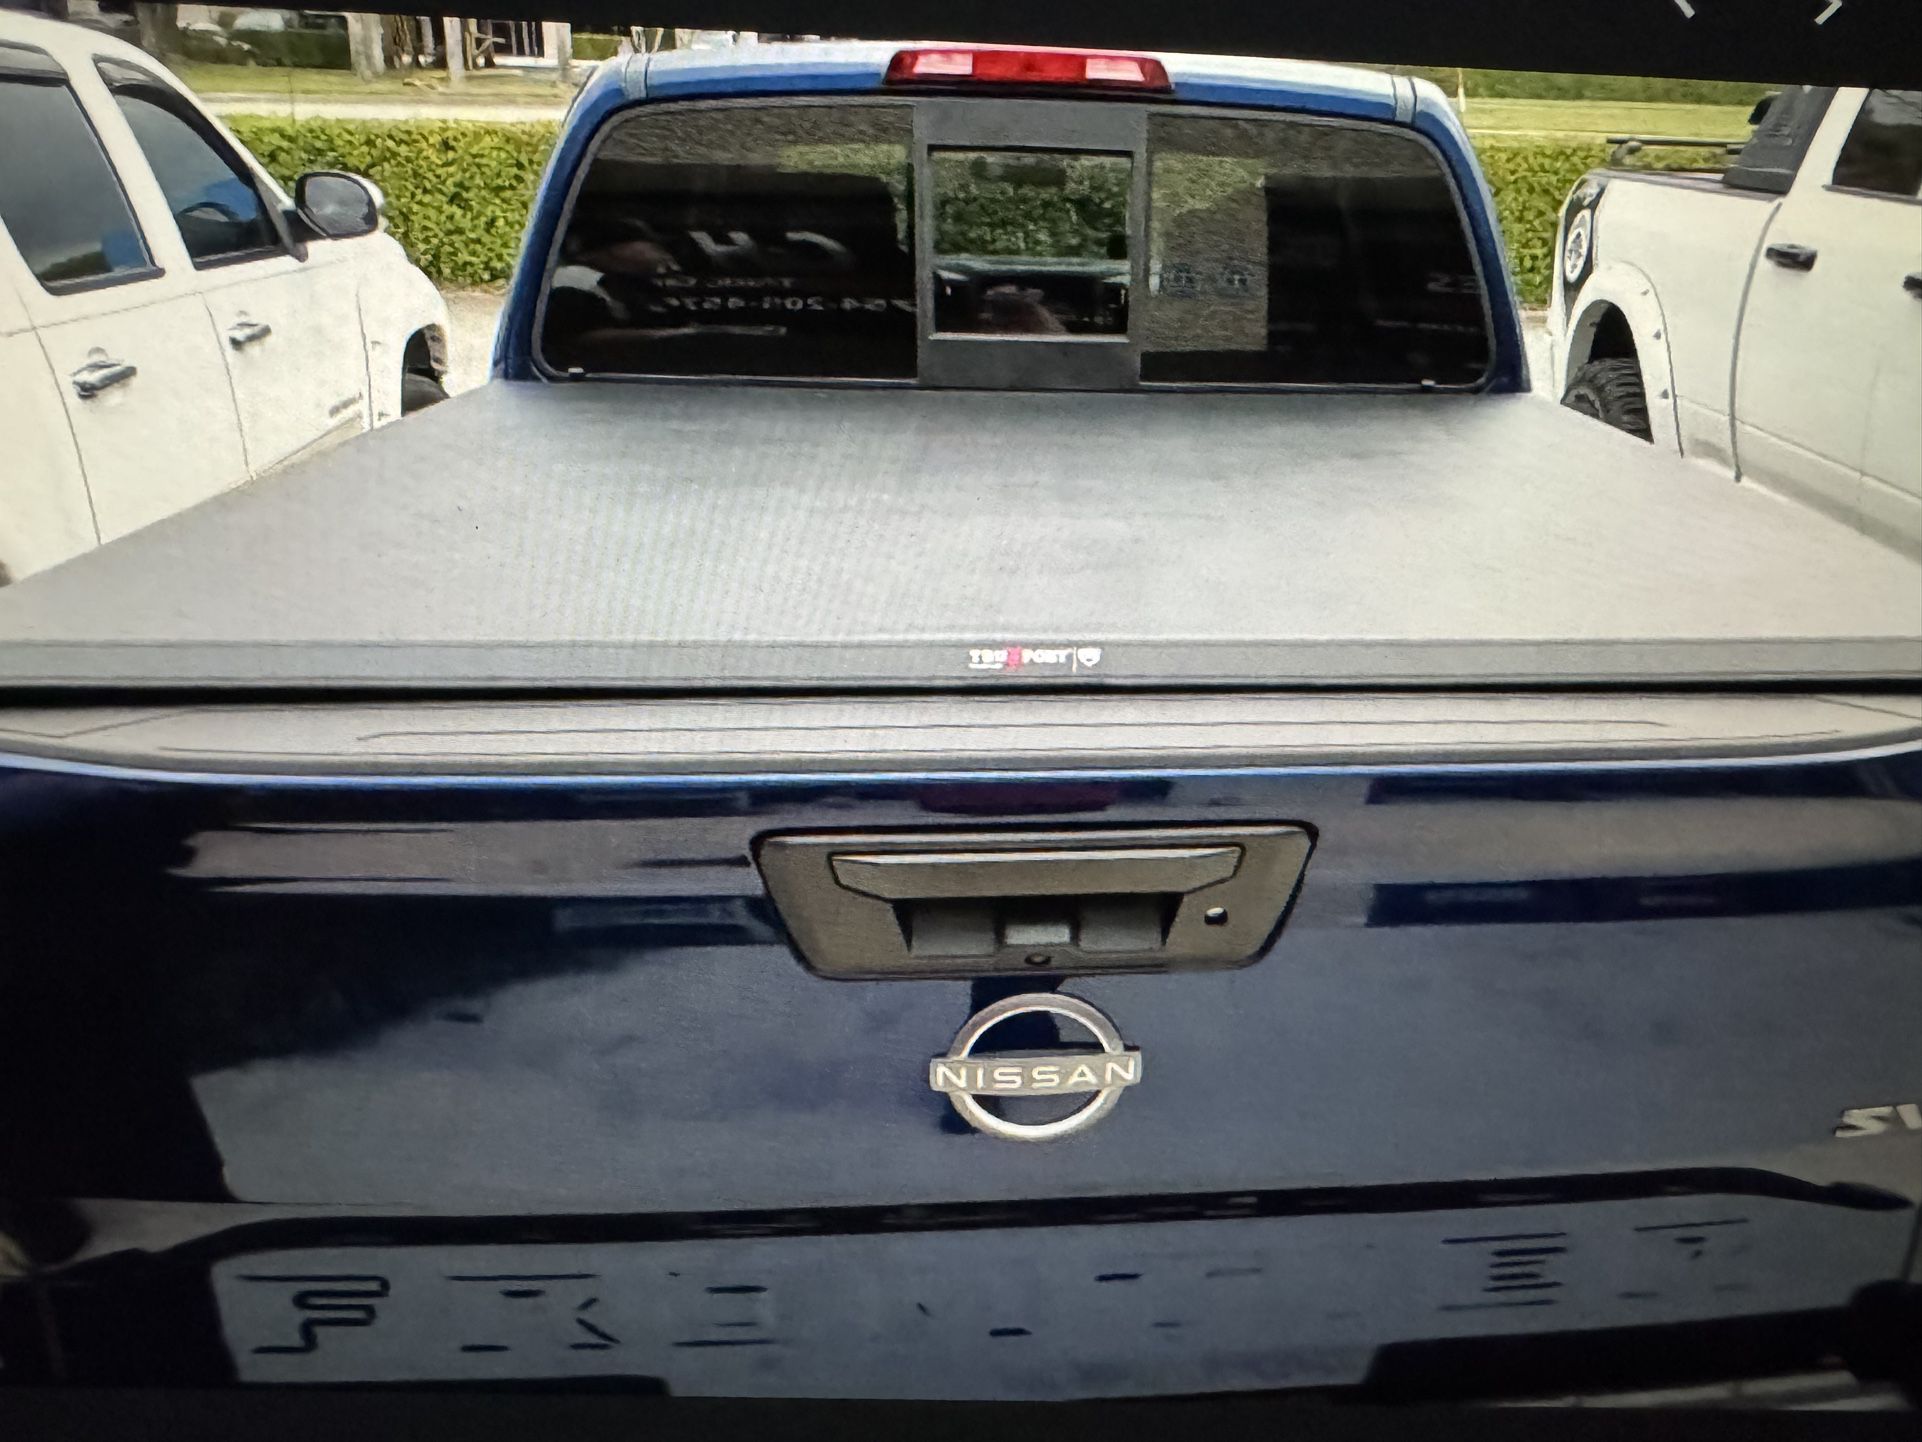 Nissan Frontier Bed cover